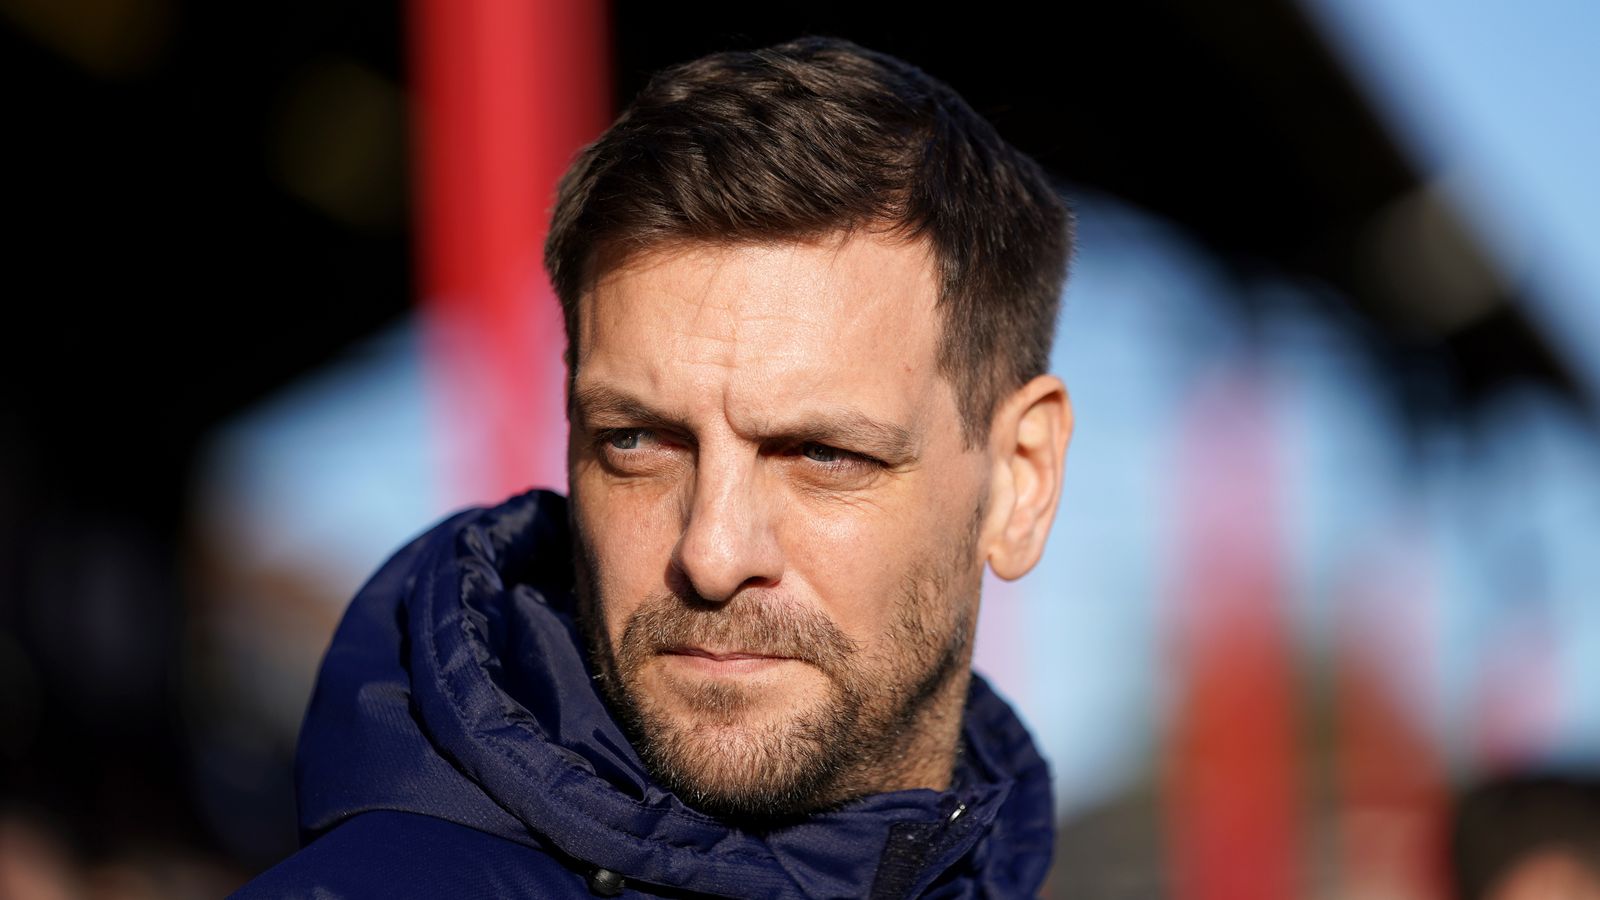 Jonathan Woodgate exclusive interview: Real Madrid injury, managing Middlesbrough and mental health